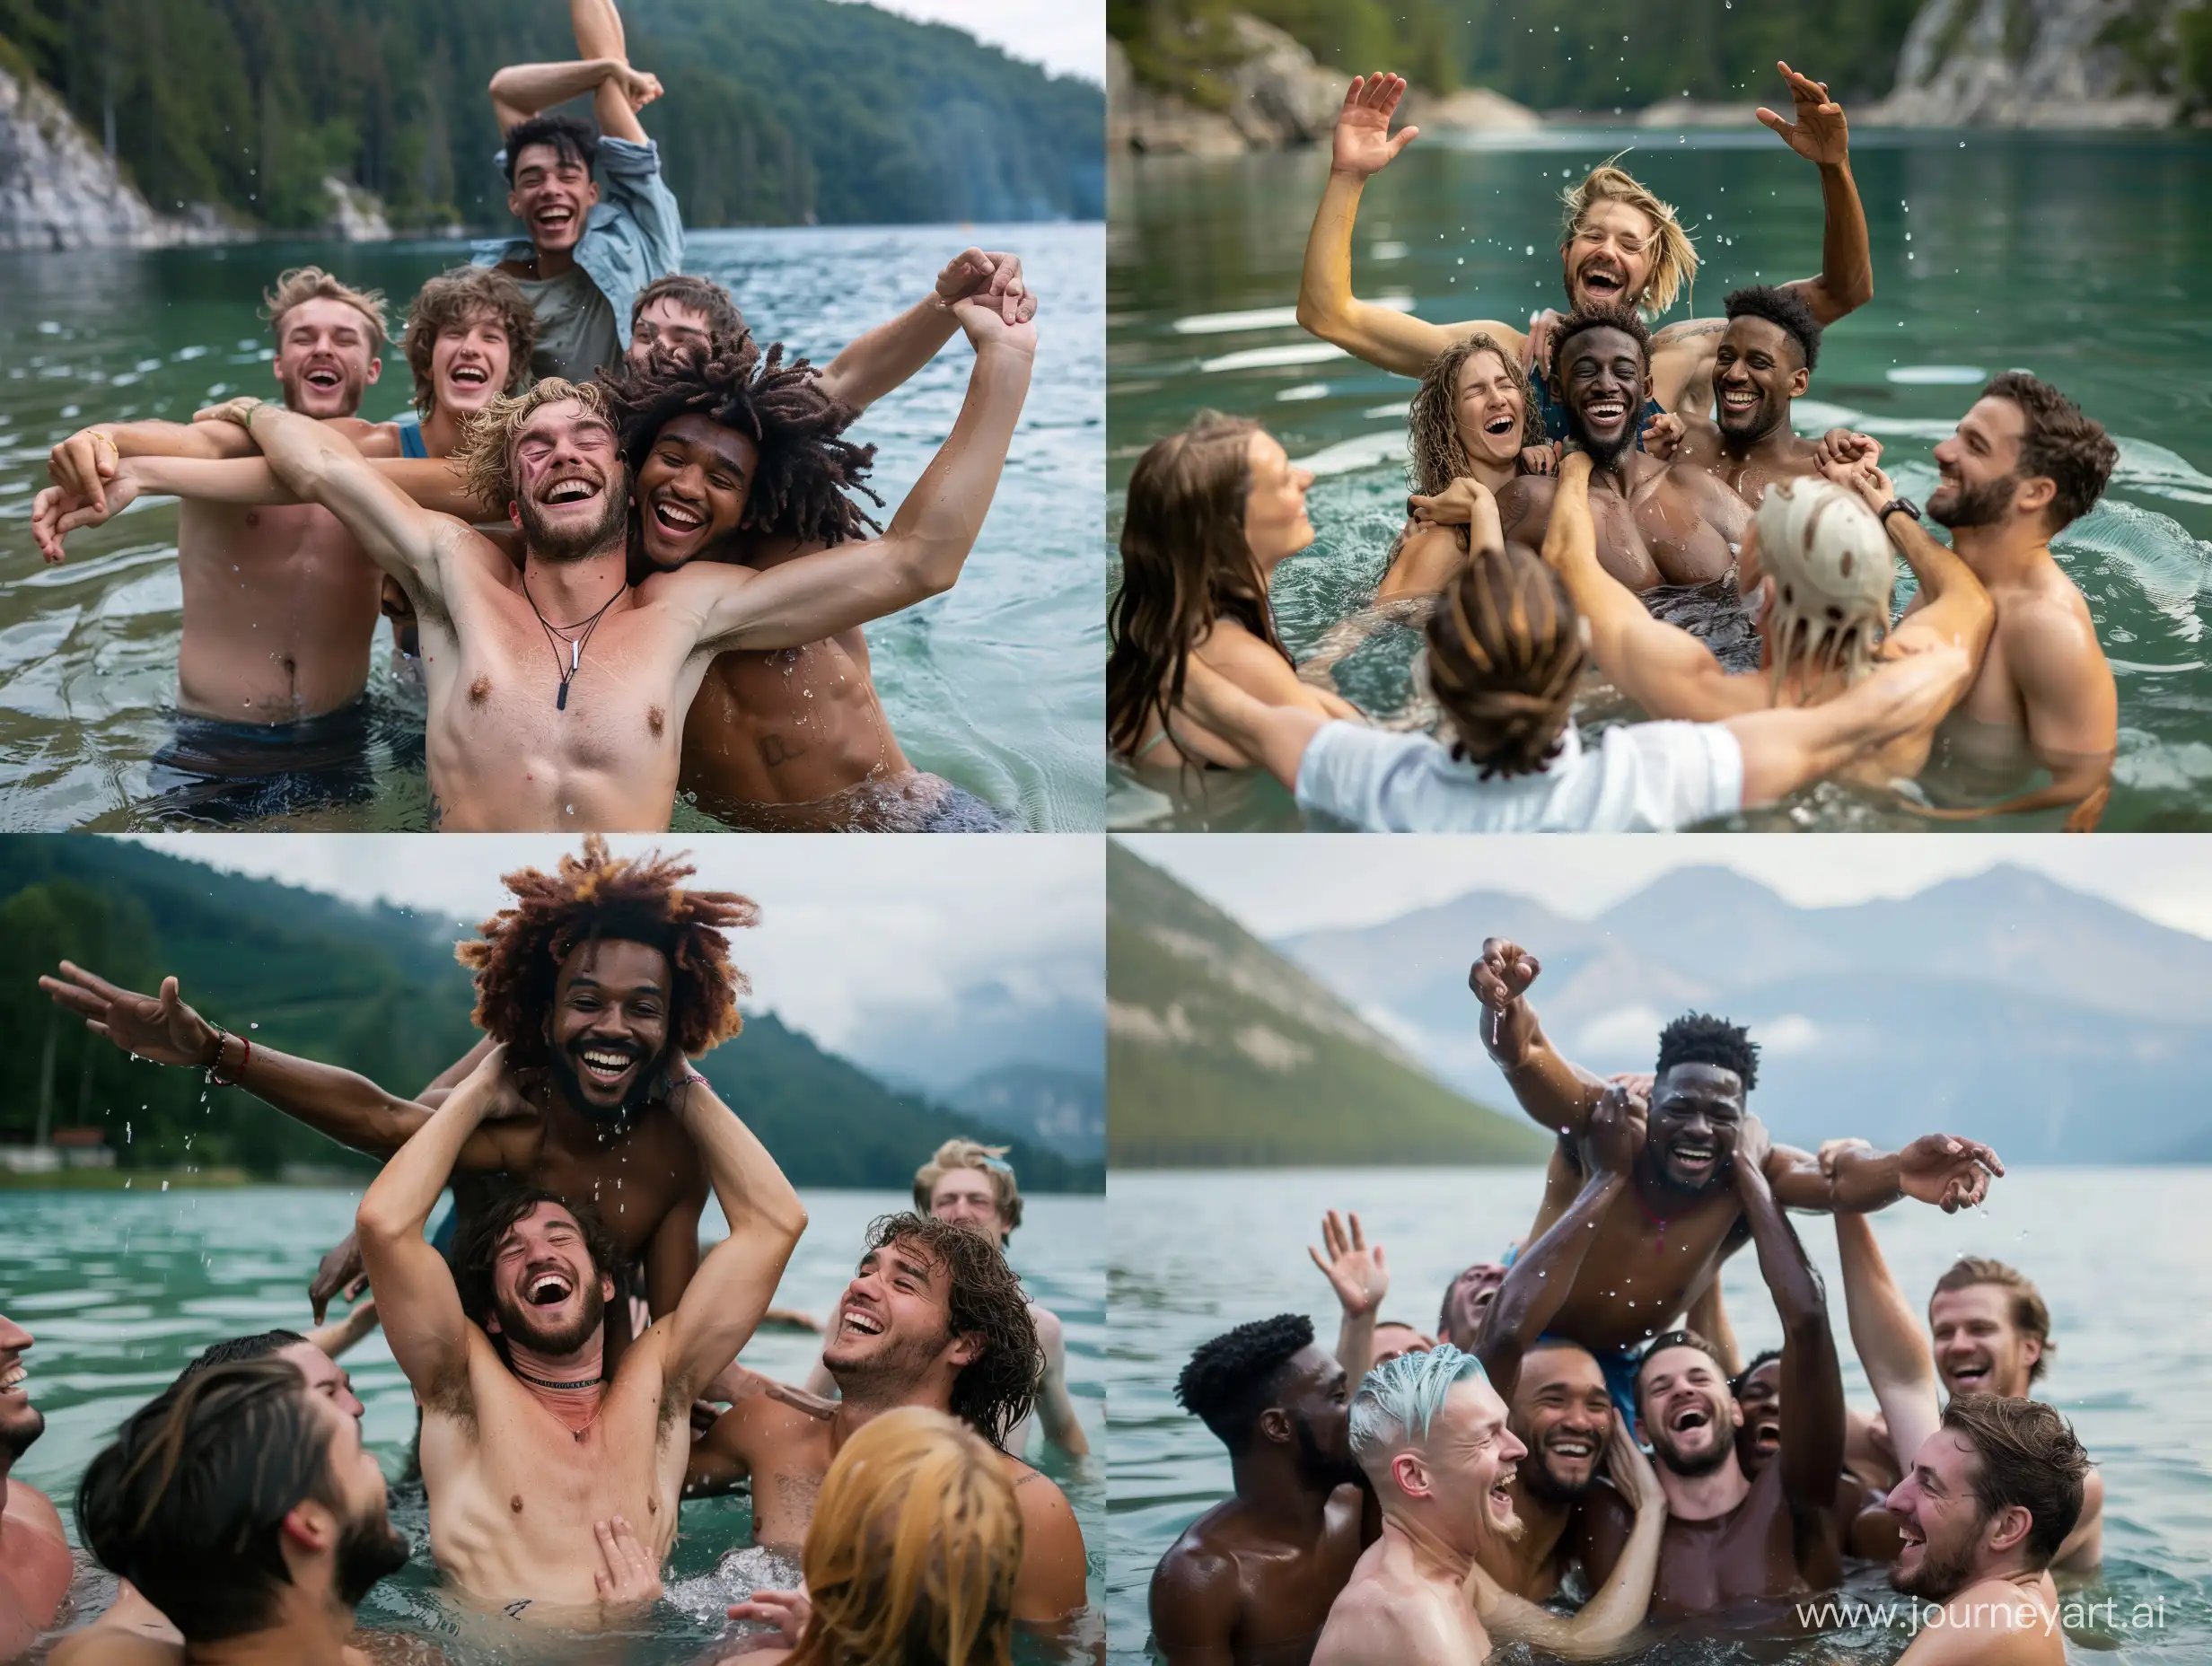 Group of attractive, diverse and likable men and women in their 20s and 30s. In a lake, they are holding one of the guys up above their heads. Everyone is laughing and having the best time. Amazing vacation vibes